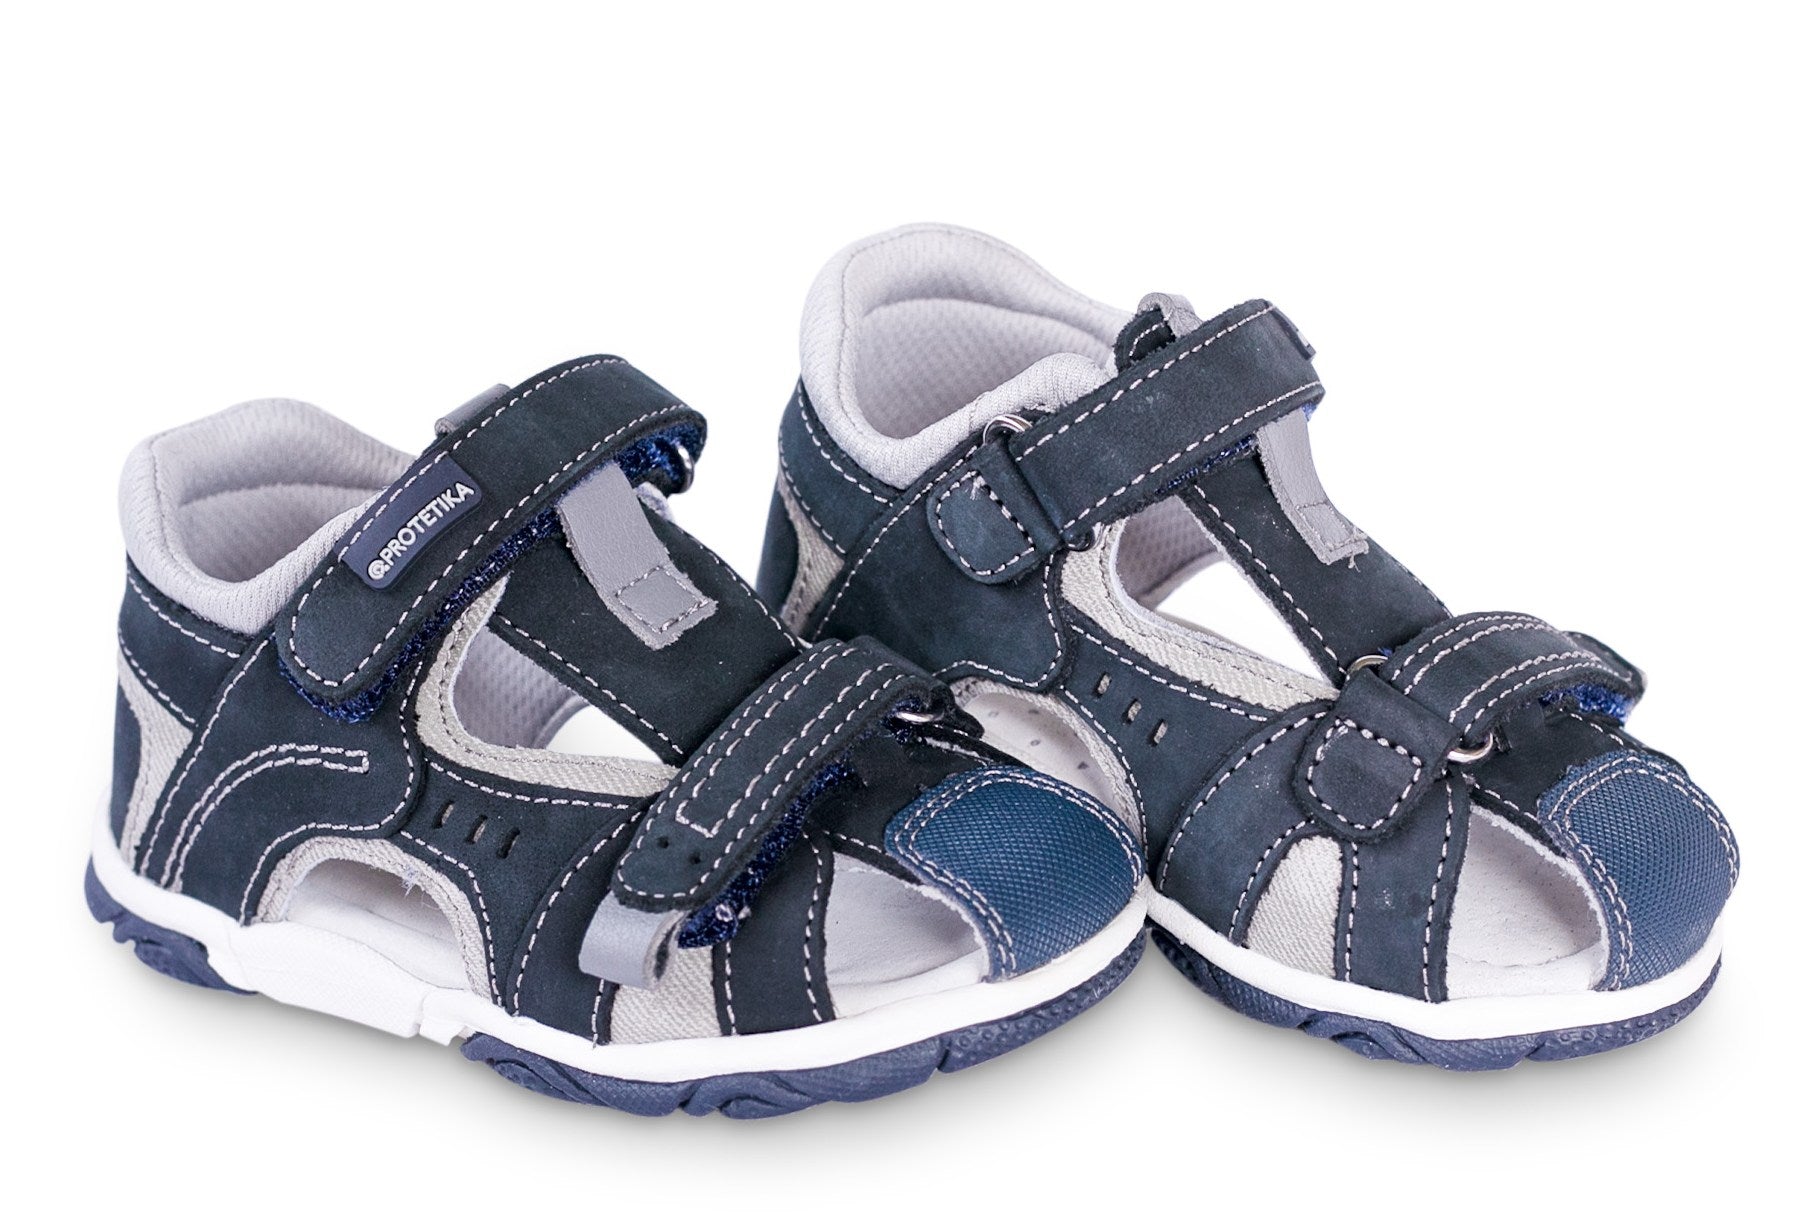 LORENZO grey toddler boy arch support sandals - feelgoodshoes.ae